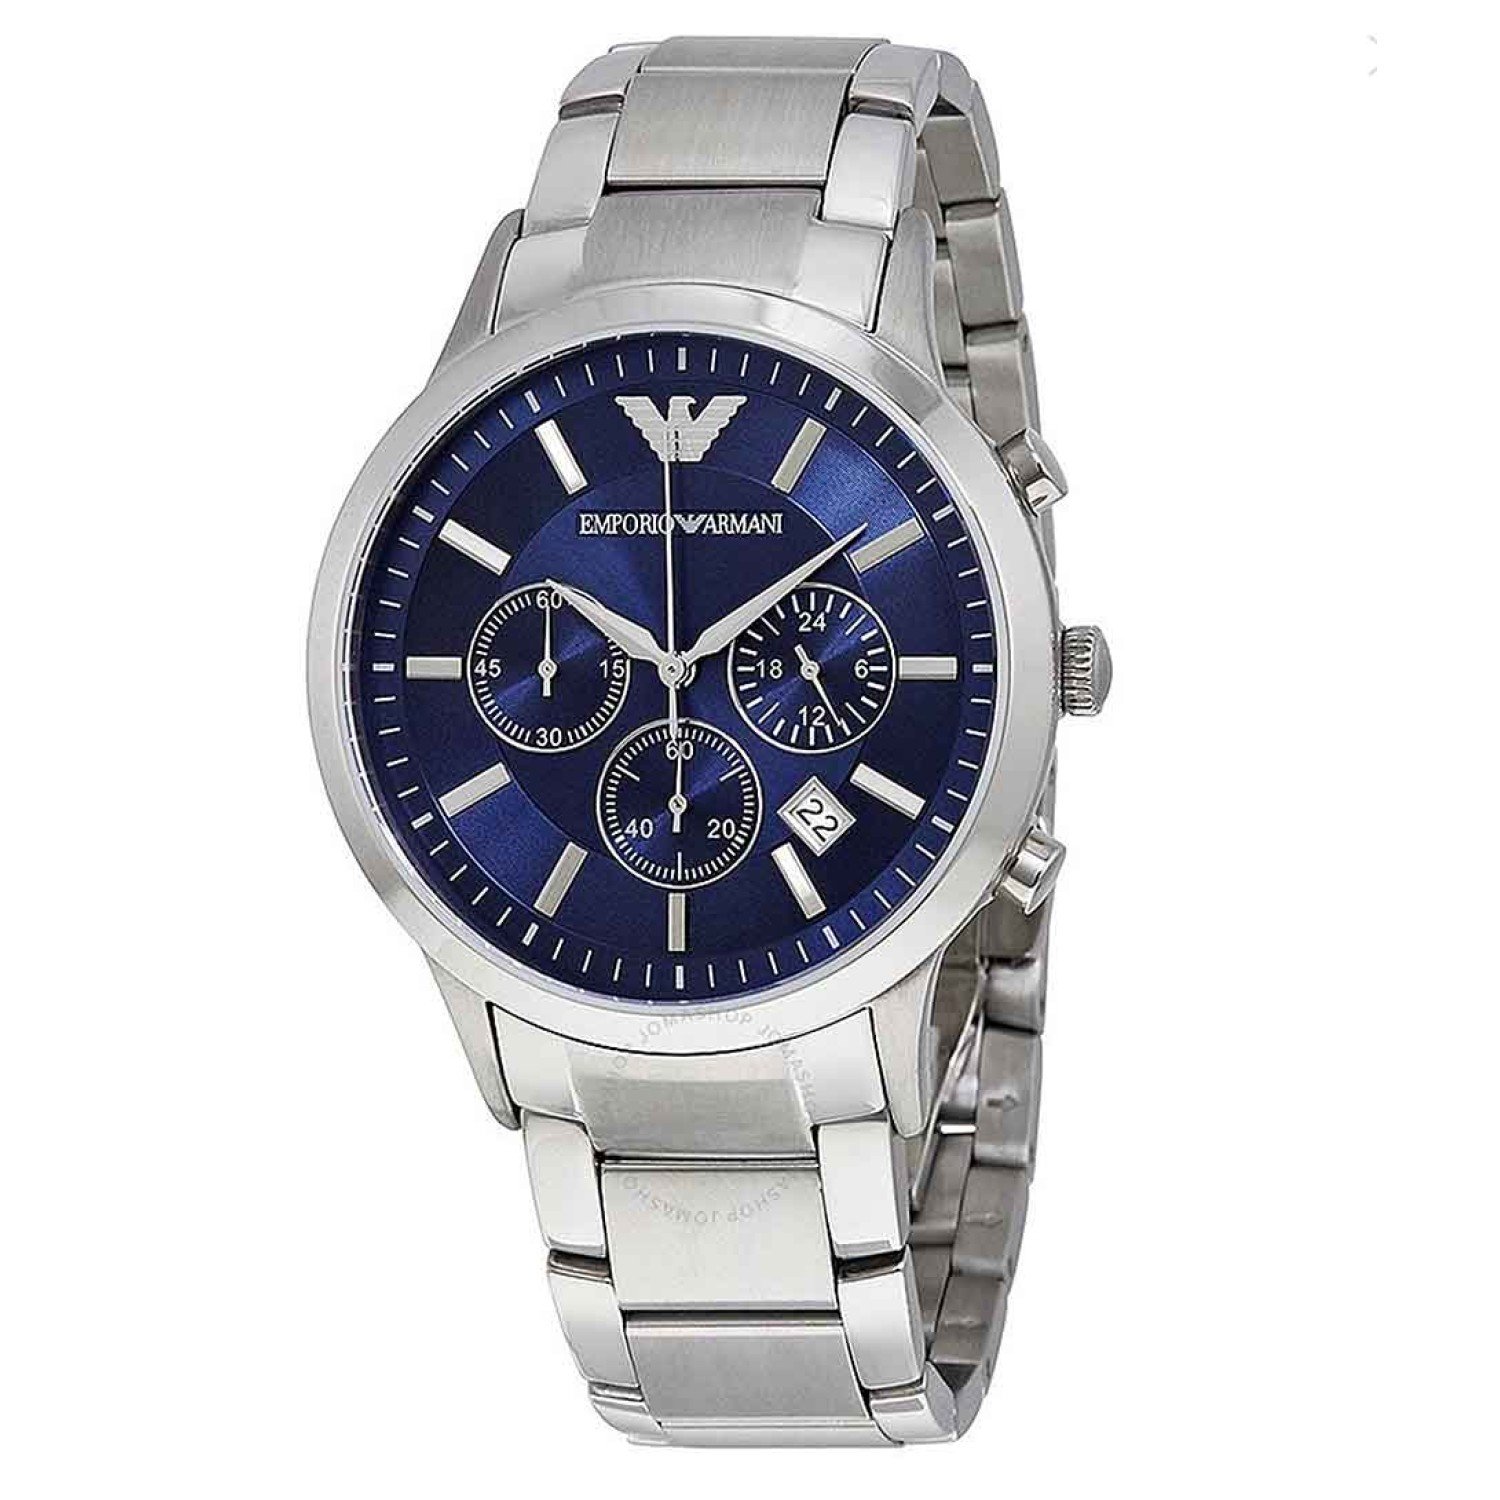 AR2448 Emporio Armani Mens Chronograph Watch. The  AR2448 Mens Emporio Armani watch has a stainless steel case and clear navy blue dial with silver baton hour markers and other elegant silver touches. Also features chronograph, date function and powered b